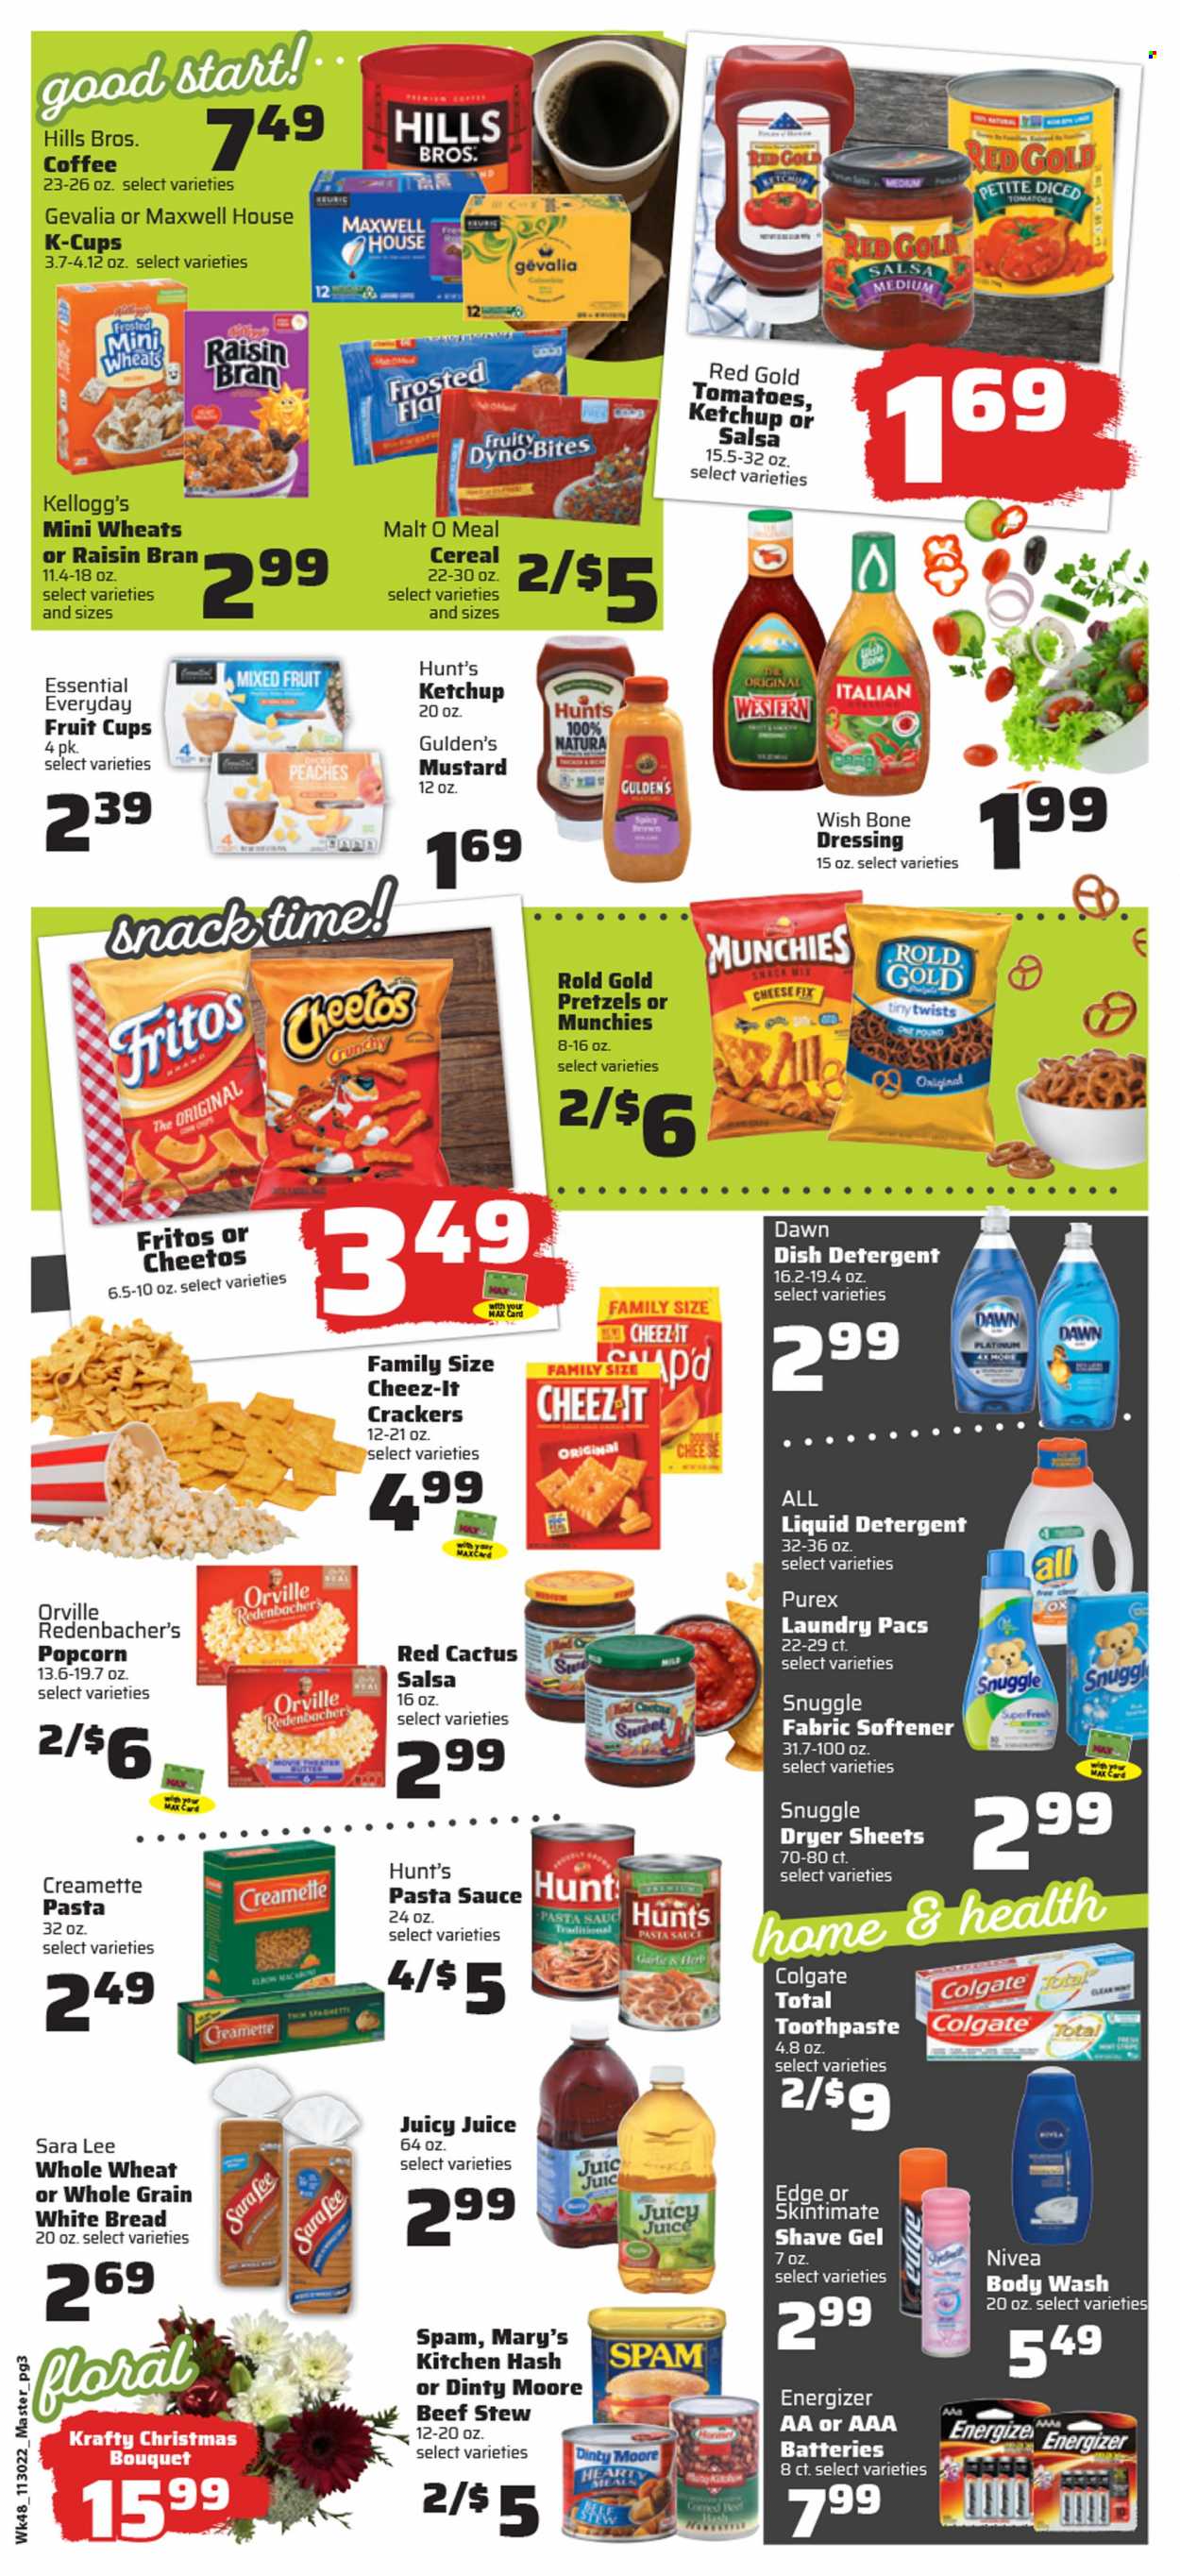 thumbnail - County Market Flyer - 11/30/2022 - 12/06/2022 - Sales products - bread, white bread, pretzels, Sara Lee, fruit cup, pasta sauce, sauce, Spam, snack, crackers, Kellogg's, fruit snack, Fritos, Cheetos, popcorn, Cheez-It, malt, cereals, Raisin Bran, Creamette, mustard, ketchup, dressing, salsa, juice, Maxwell House, coffee, coffee capsules, K-Cups, Gevalia. Page 3.